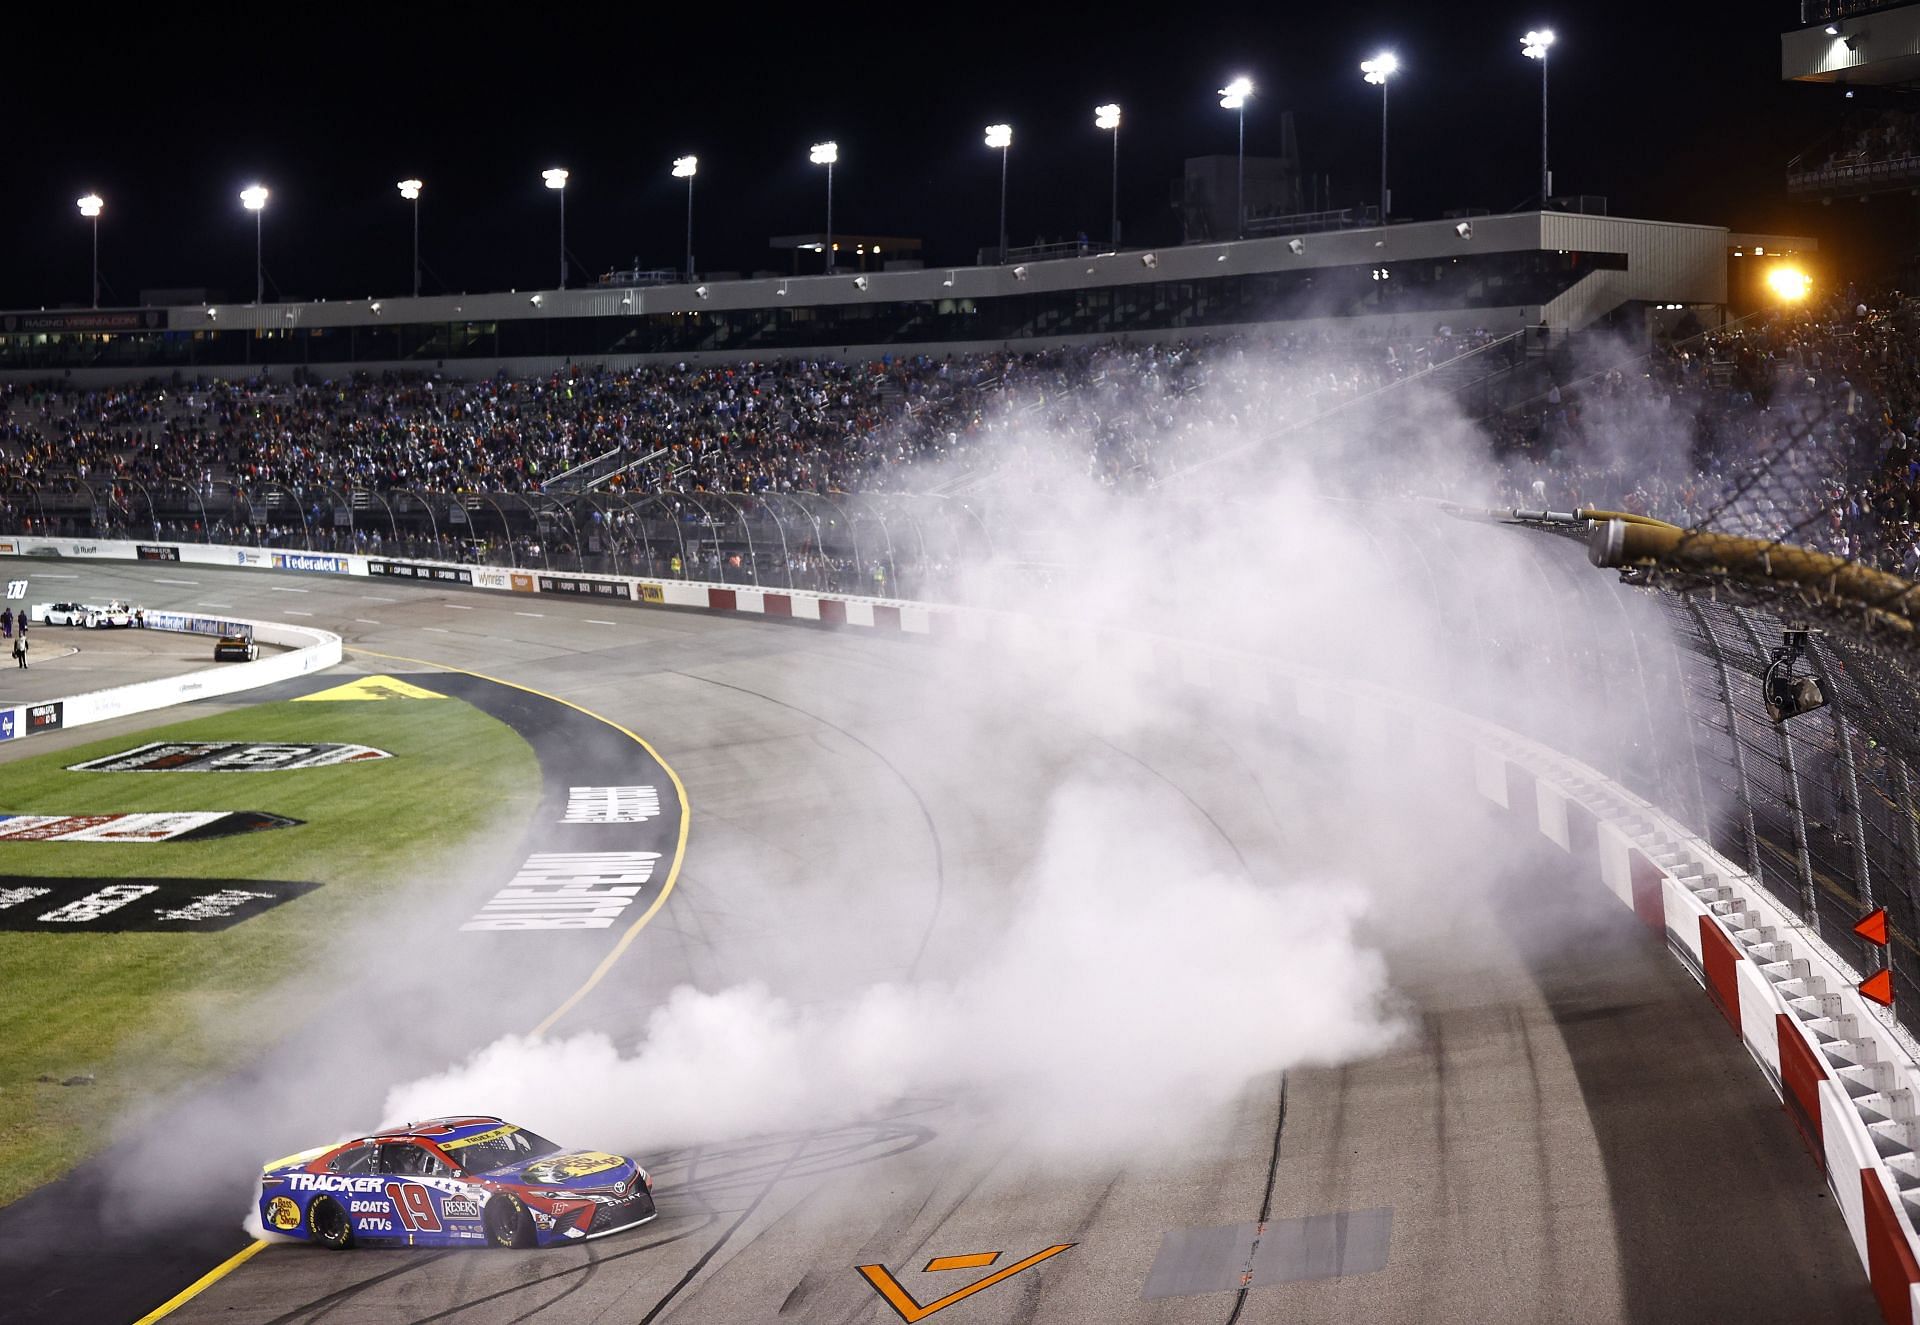 Martin Truex Jr. Martin Truex Jr. celebrates with a burnout after winning the NASCAR Cup Series Federated Auto Parts 400 Salute to First Responders at Richmond Raceway. (Photo by Jared C. Tilton/Getty Images)